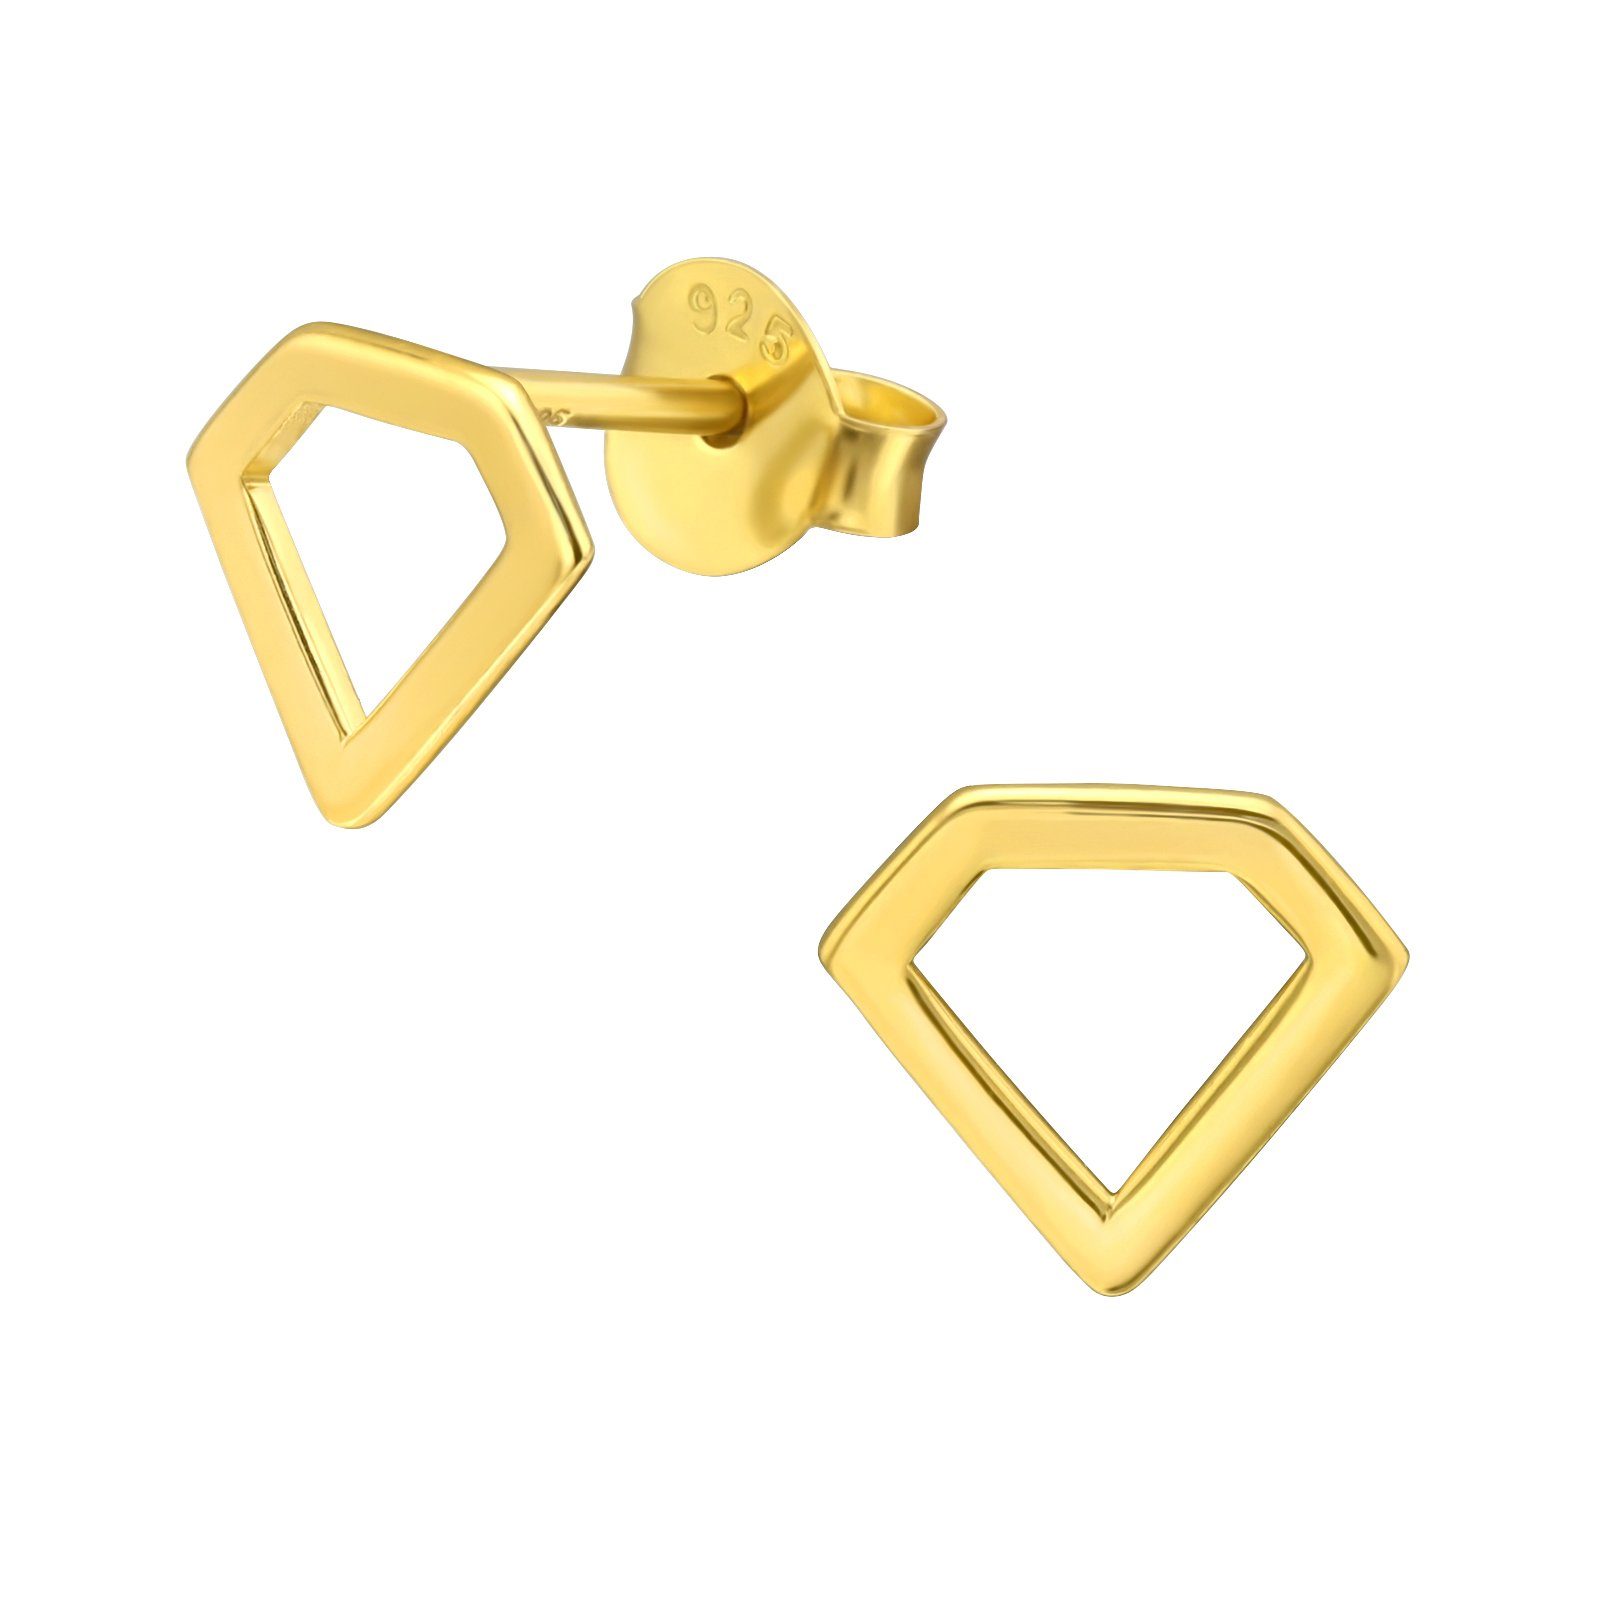 ALEXANDER YORK Paar Ohrstecker DIAMANT cut-out Design in gold, 2-tlg., 925 Sterling Silber